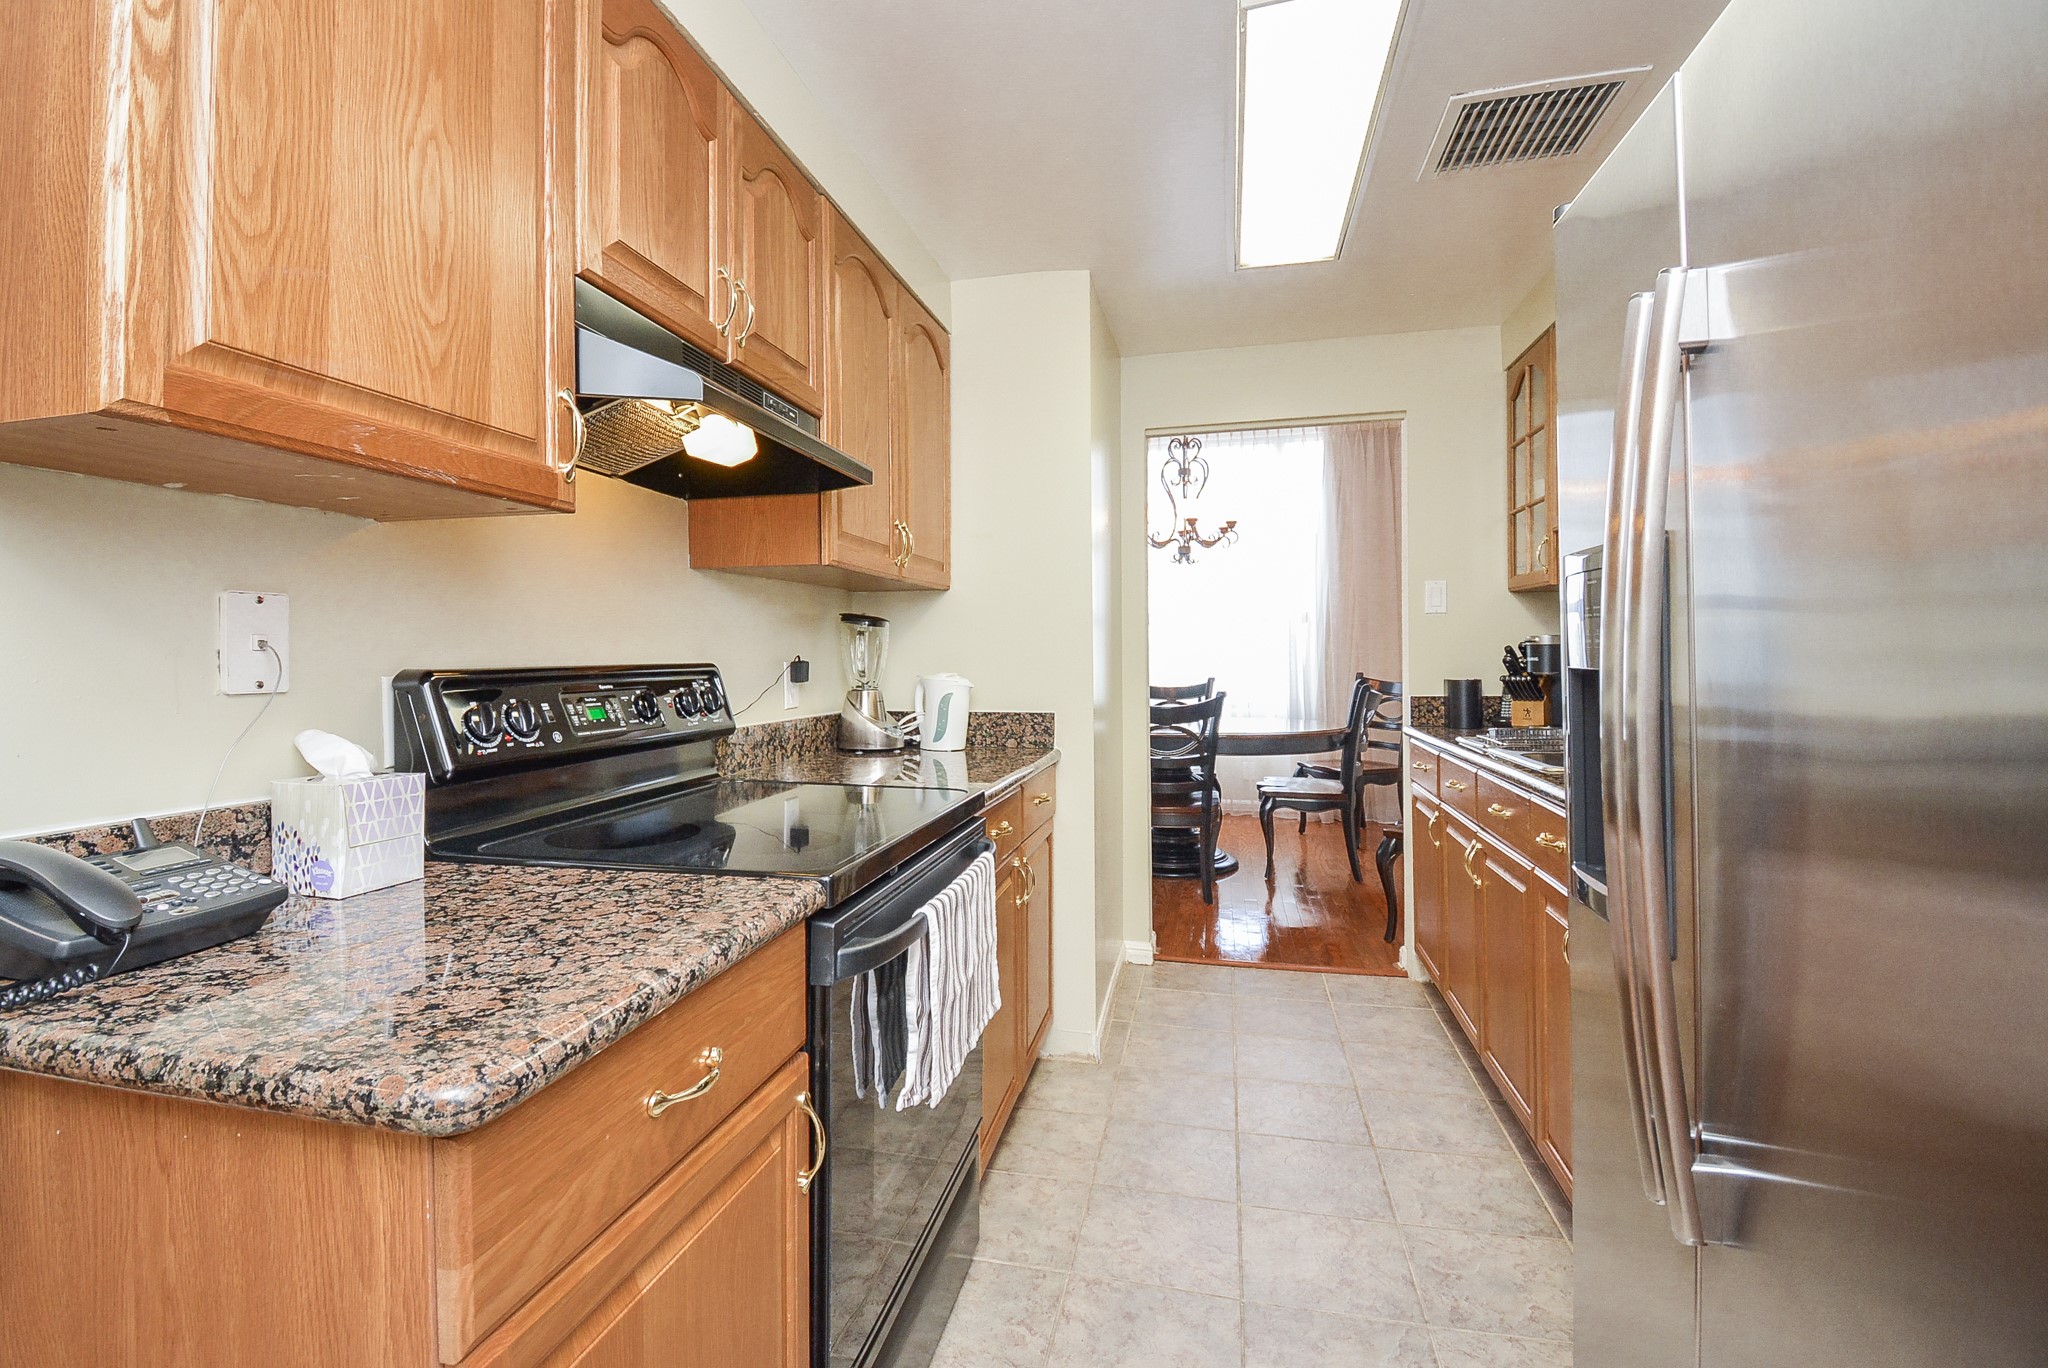 Kitchen with granite countertops and tile floors.